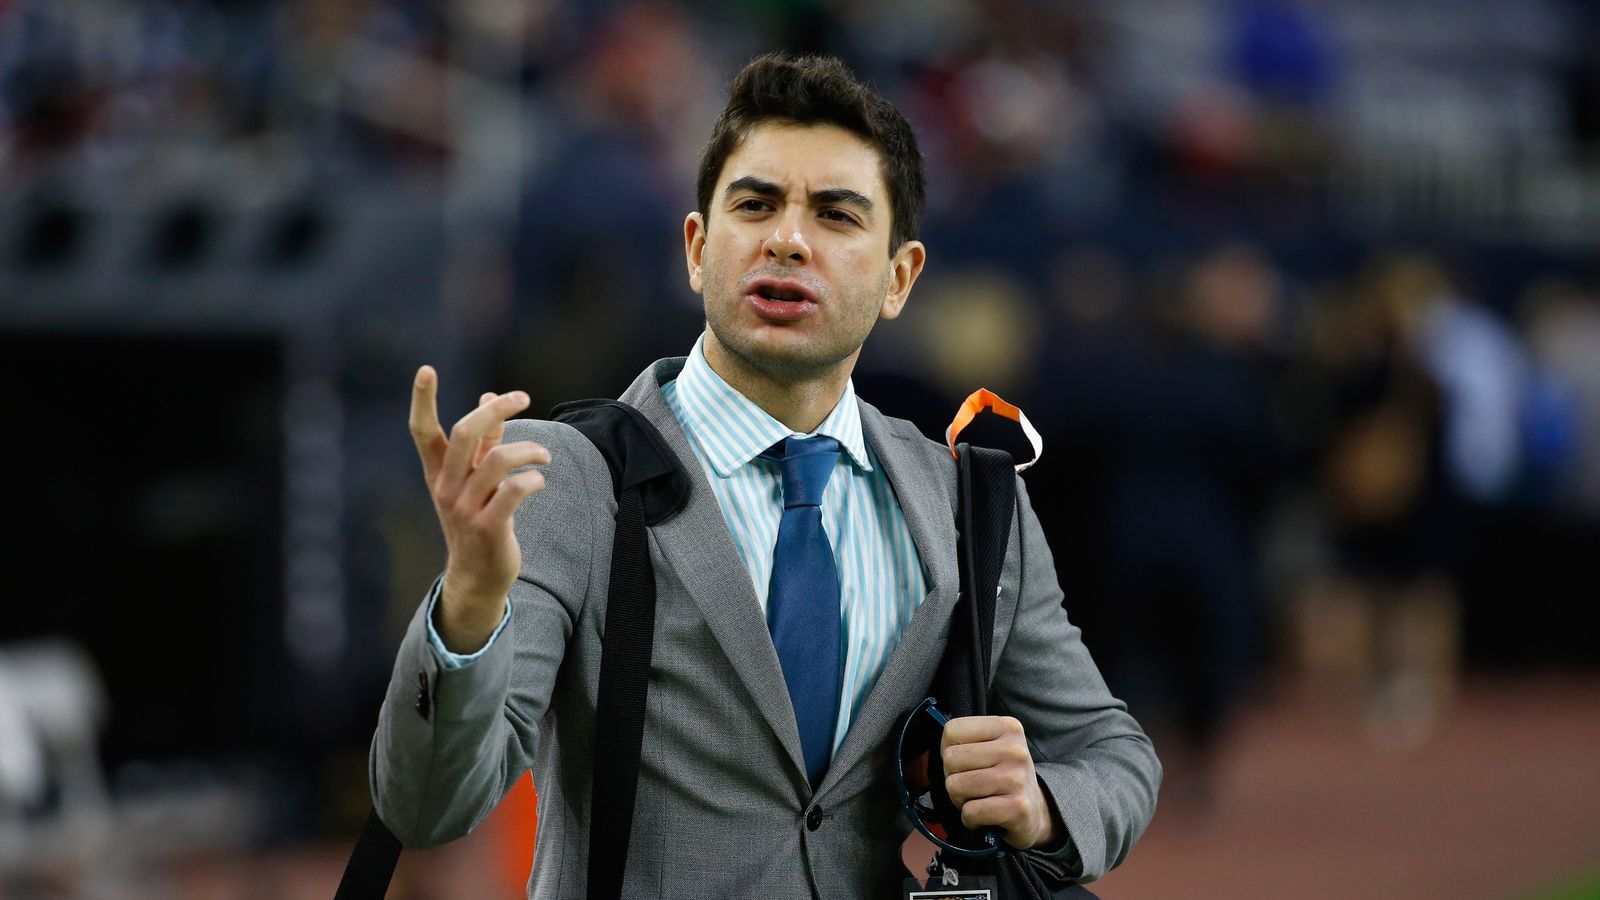 Fulham FC vice-chairman Tony Khan tells fan to 'go to hell' after Burnley defeat | UK ...